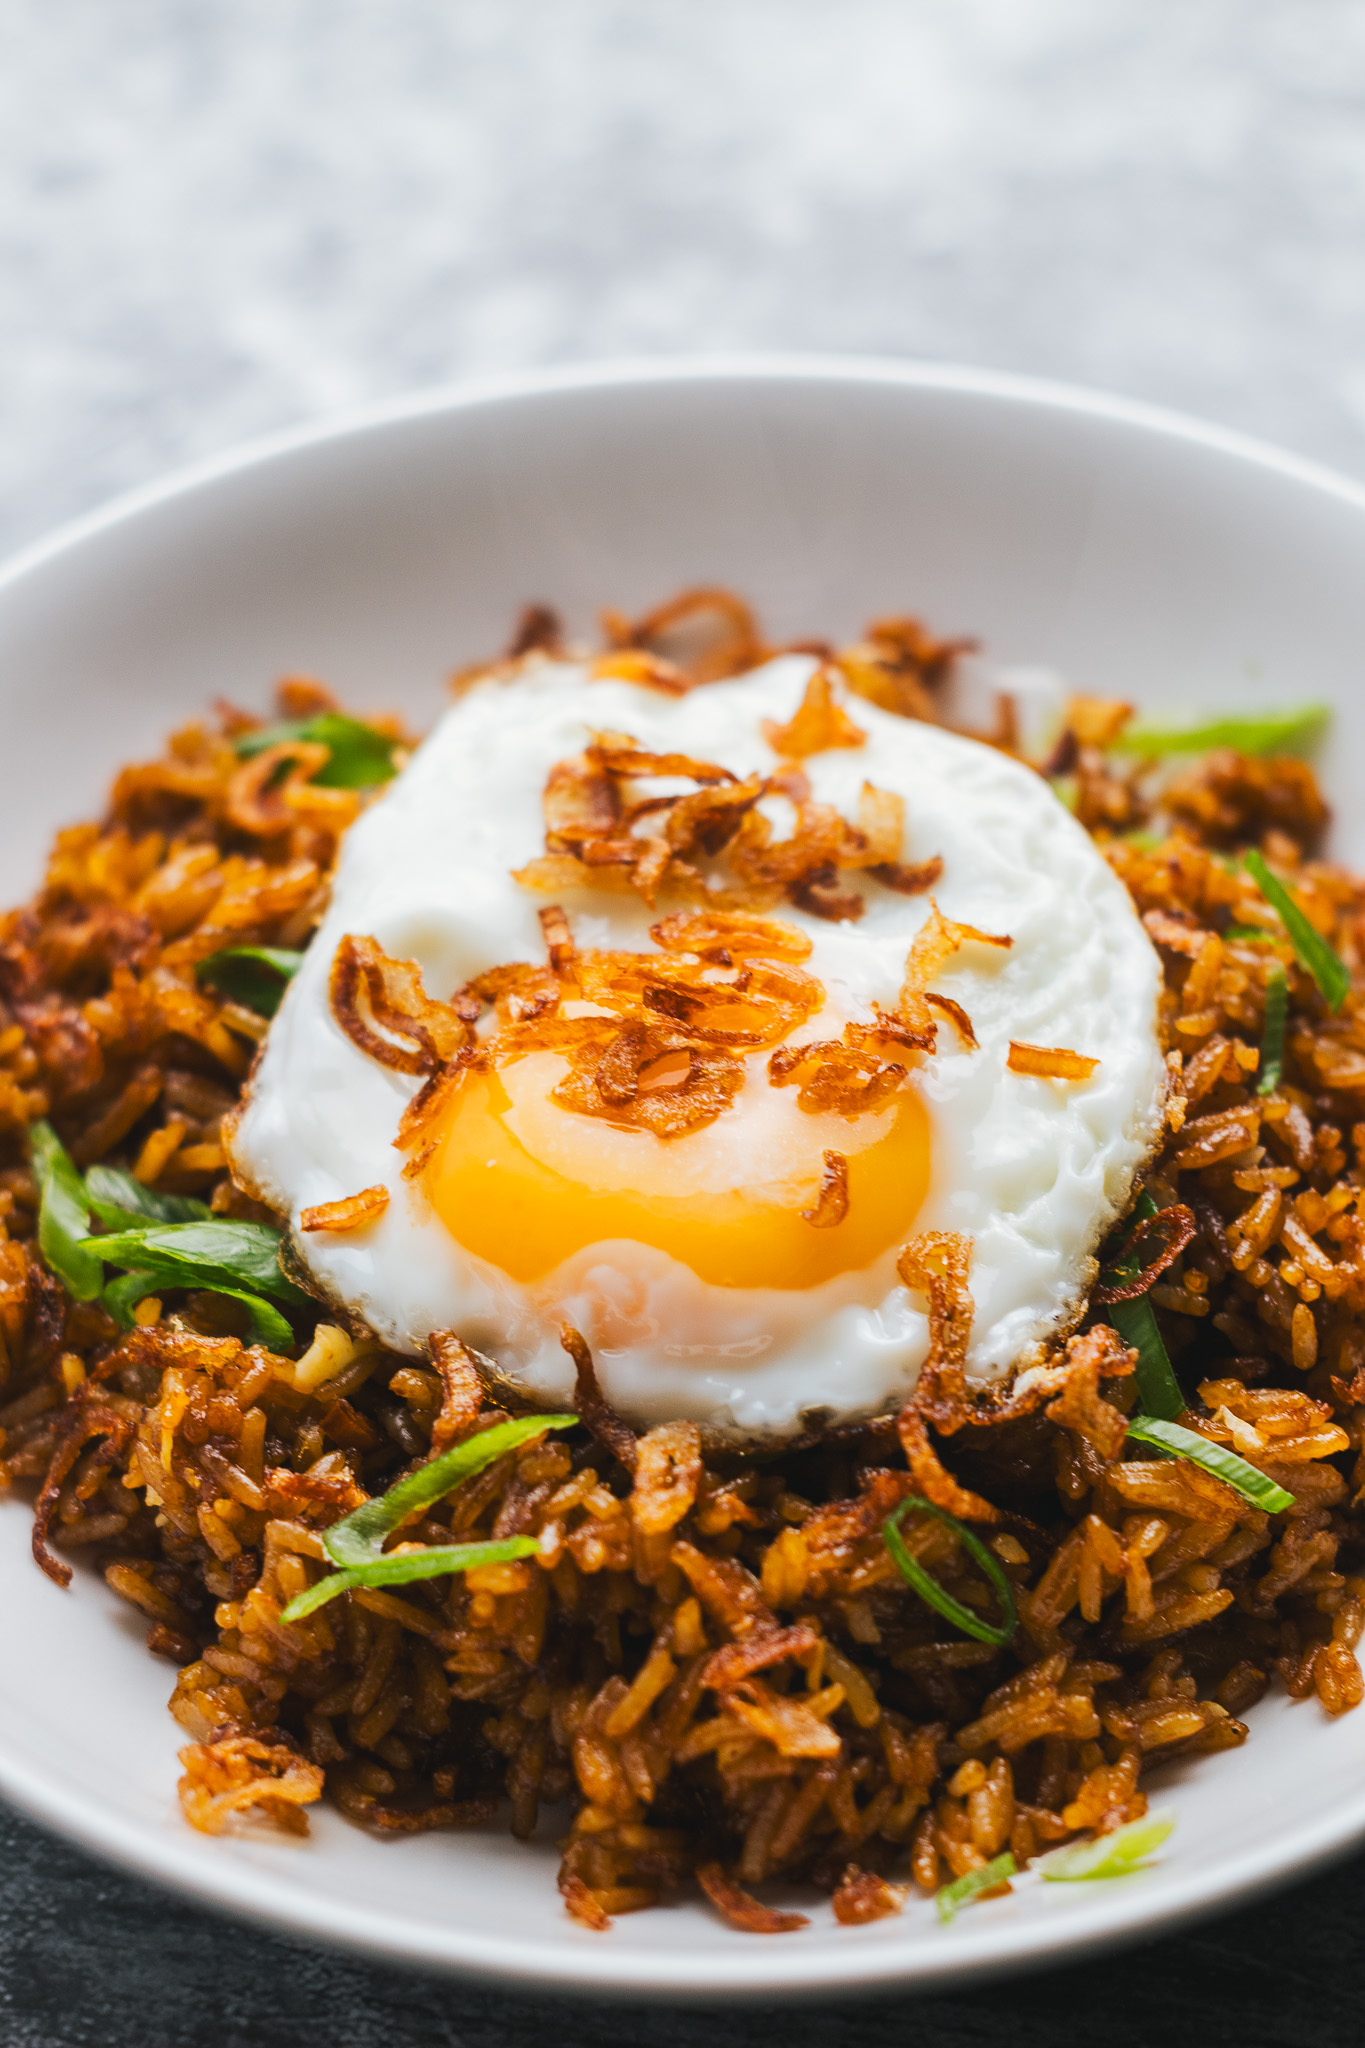 Spicy fried rice topped with a fried egg and crispy shallots in a bowl